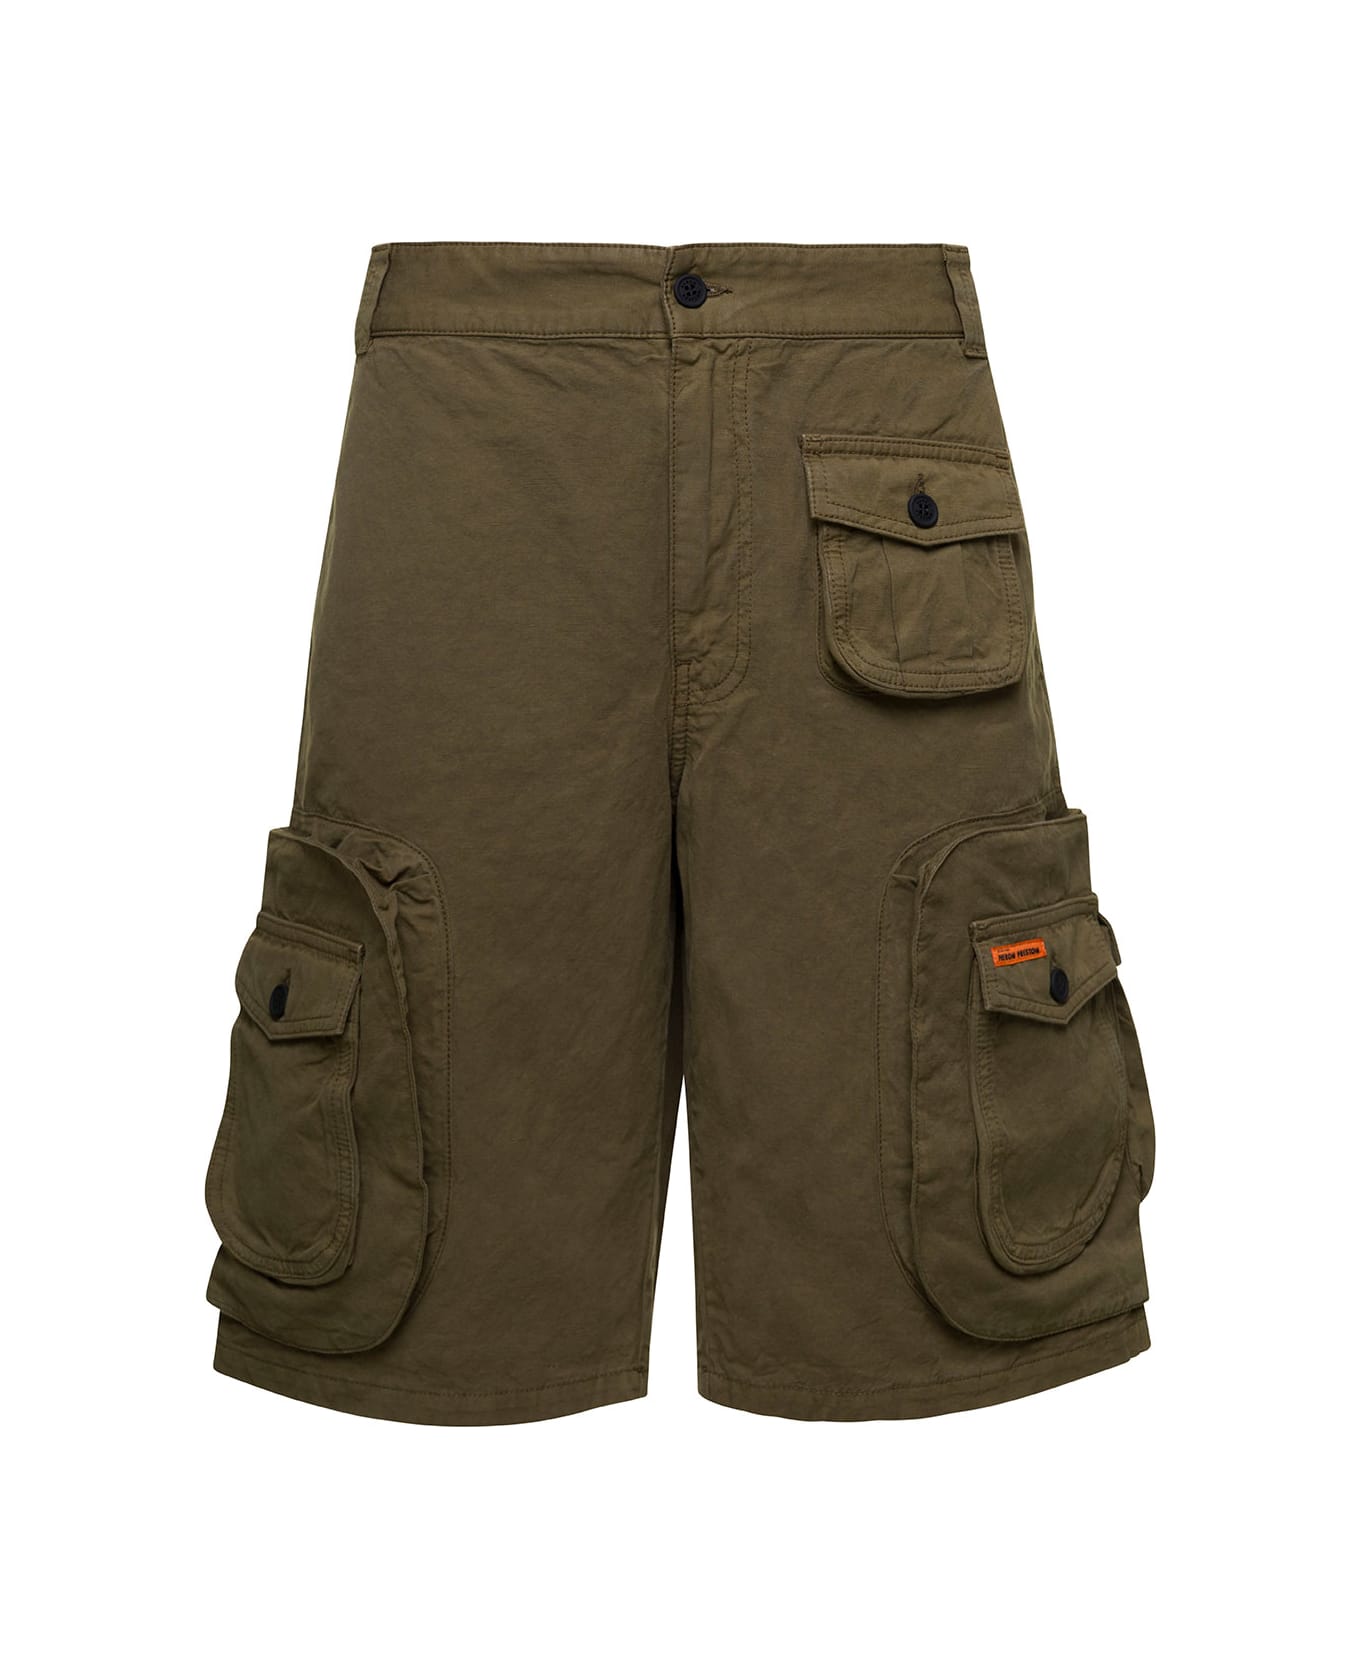 HERON PRESTON Olive Green Cargo Shorts With Multi-pockets In Cotton Blend Man - Green